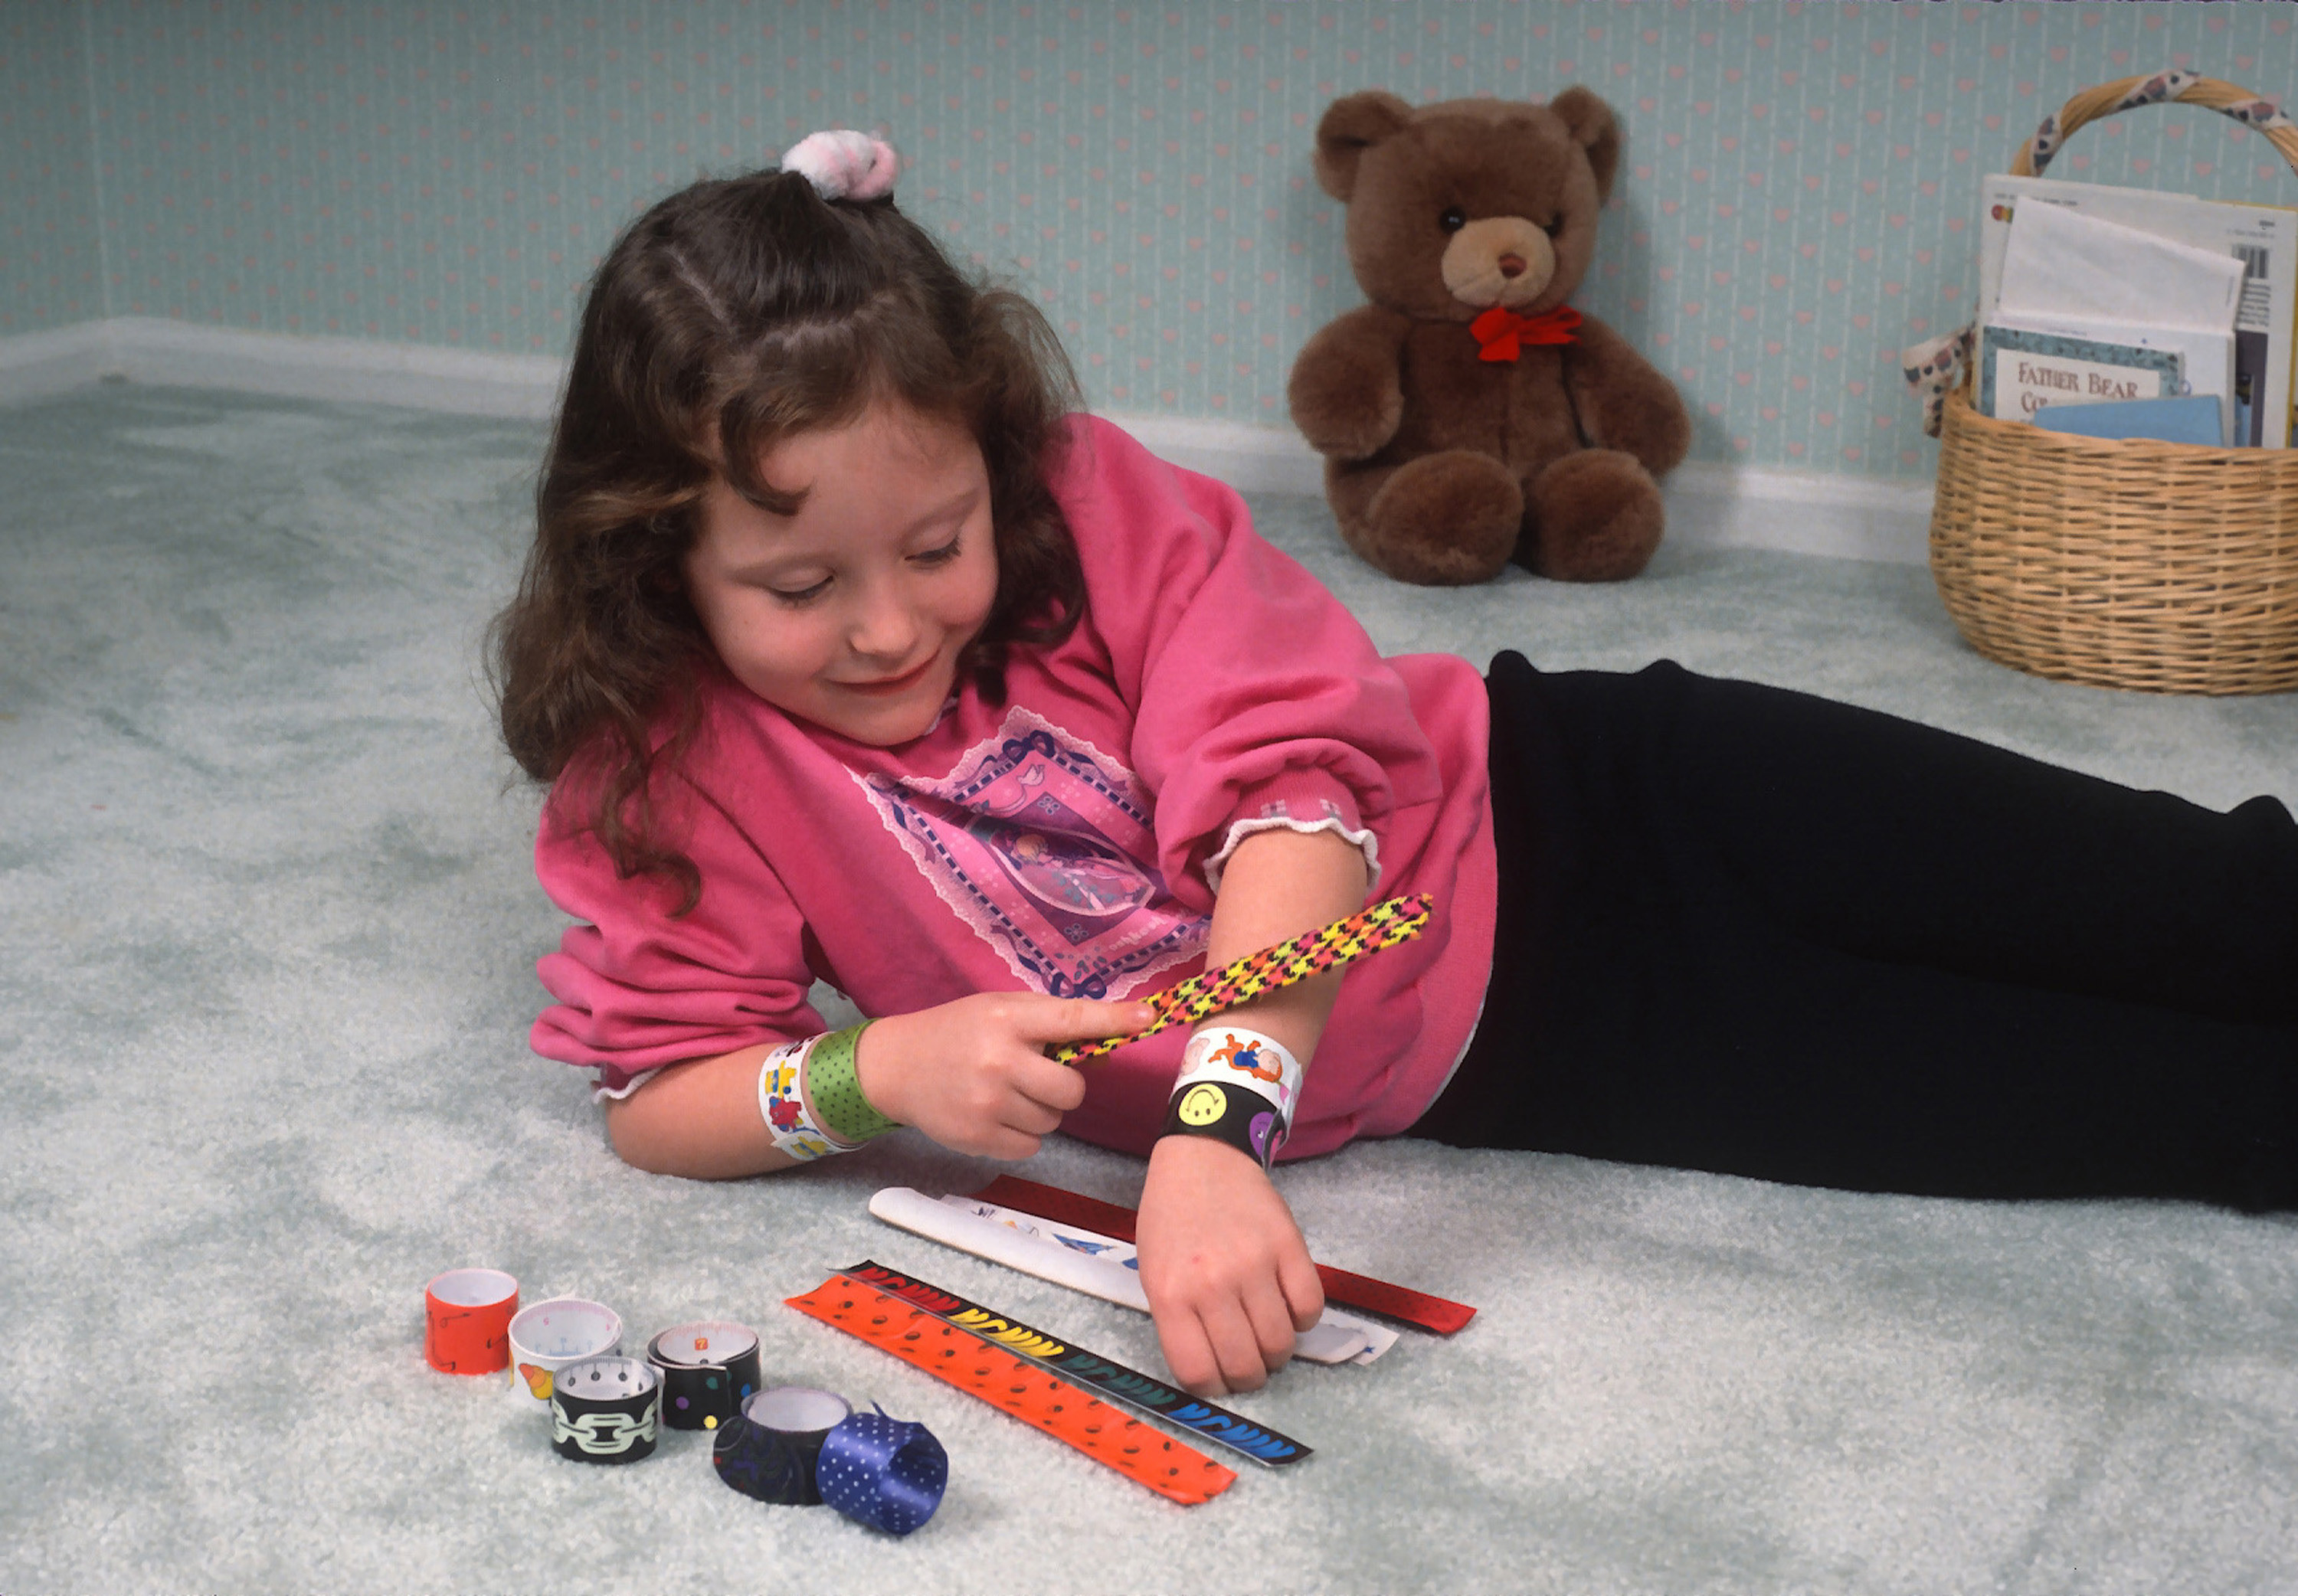 A young girl showing her snap bracelets on her wrist, with more on the floor